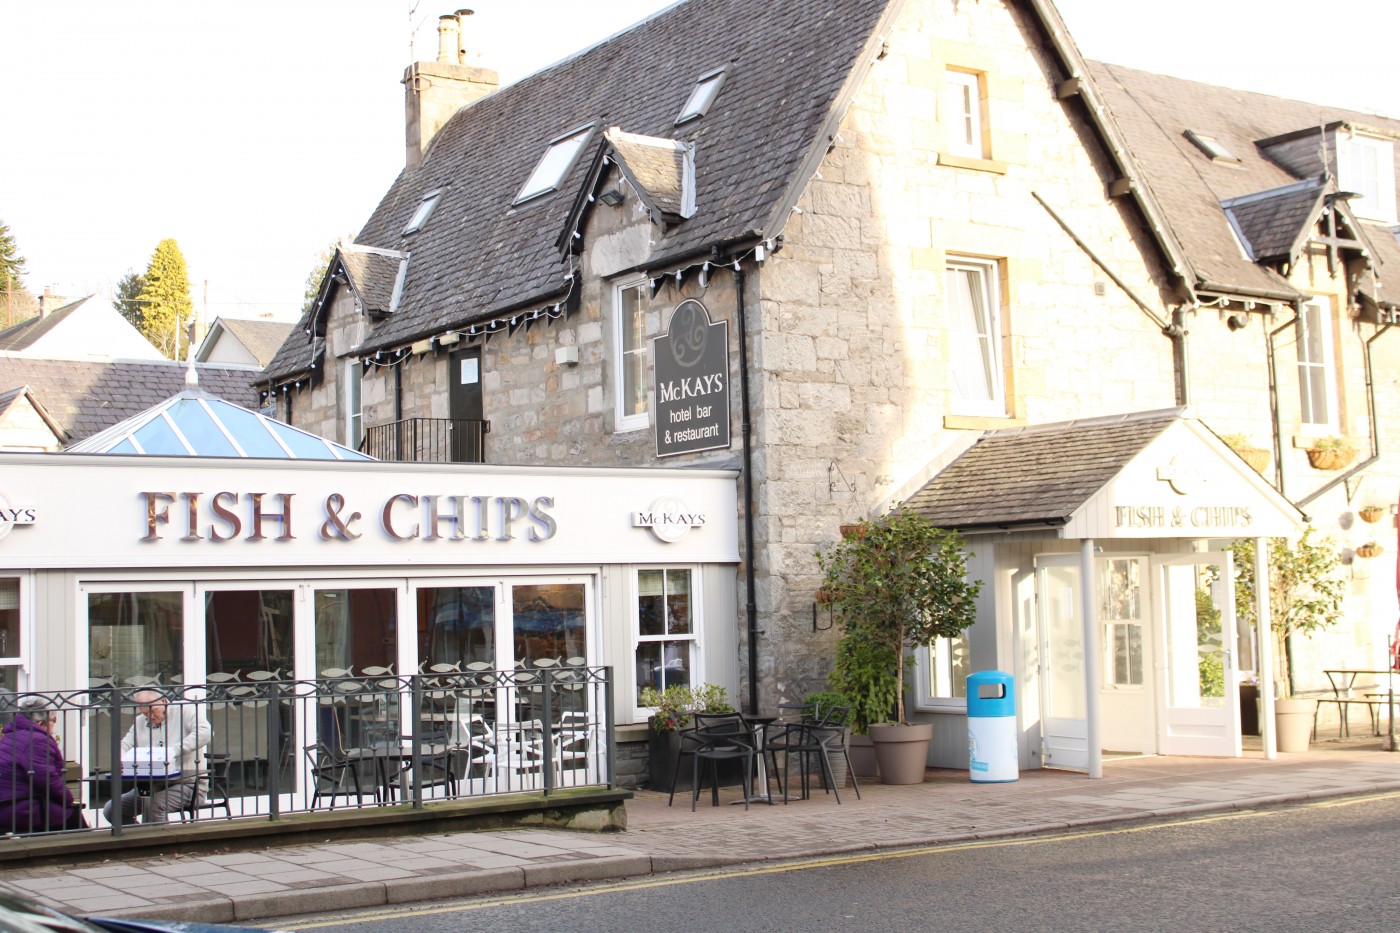 McKay's Fish and Chips takeaway and restaurant